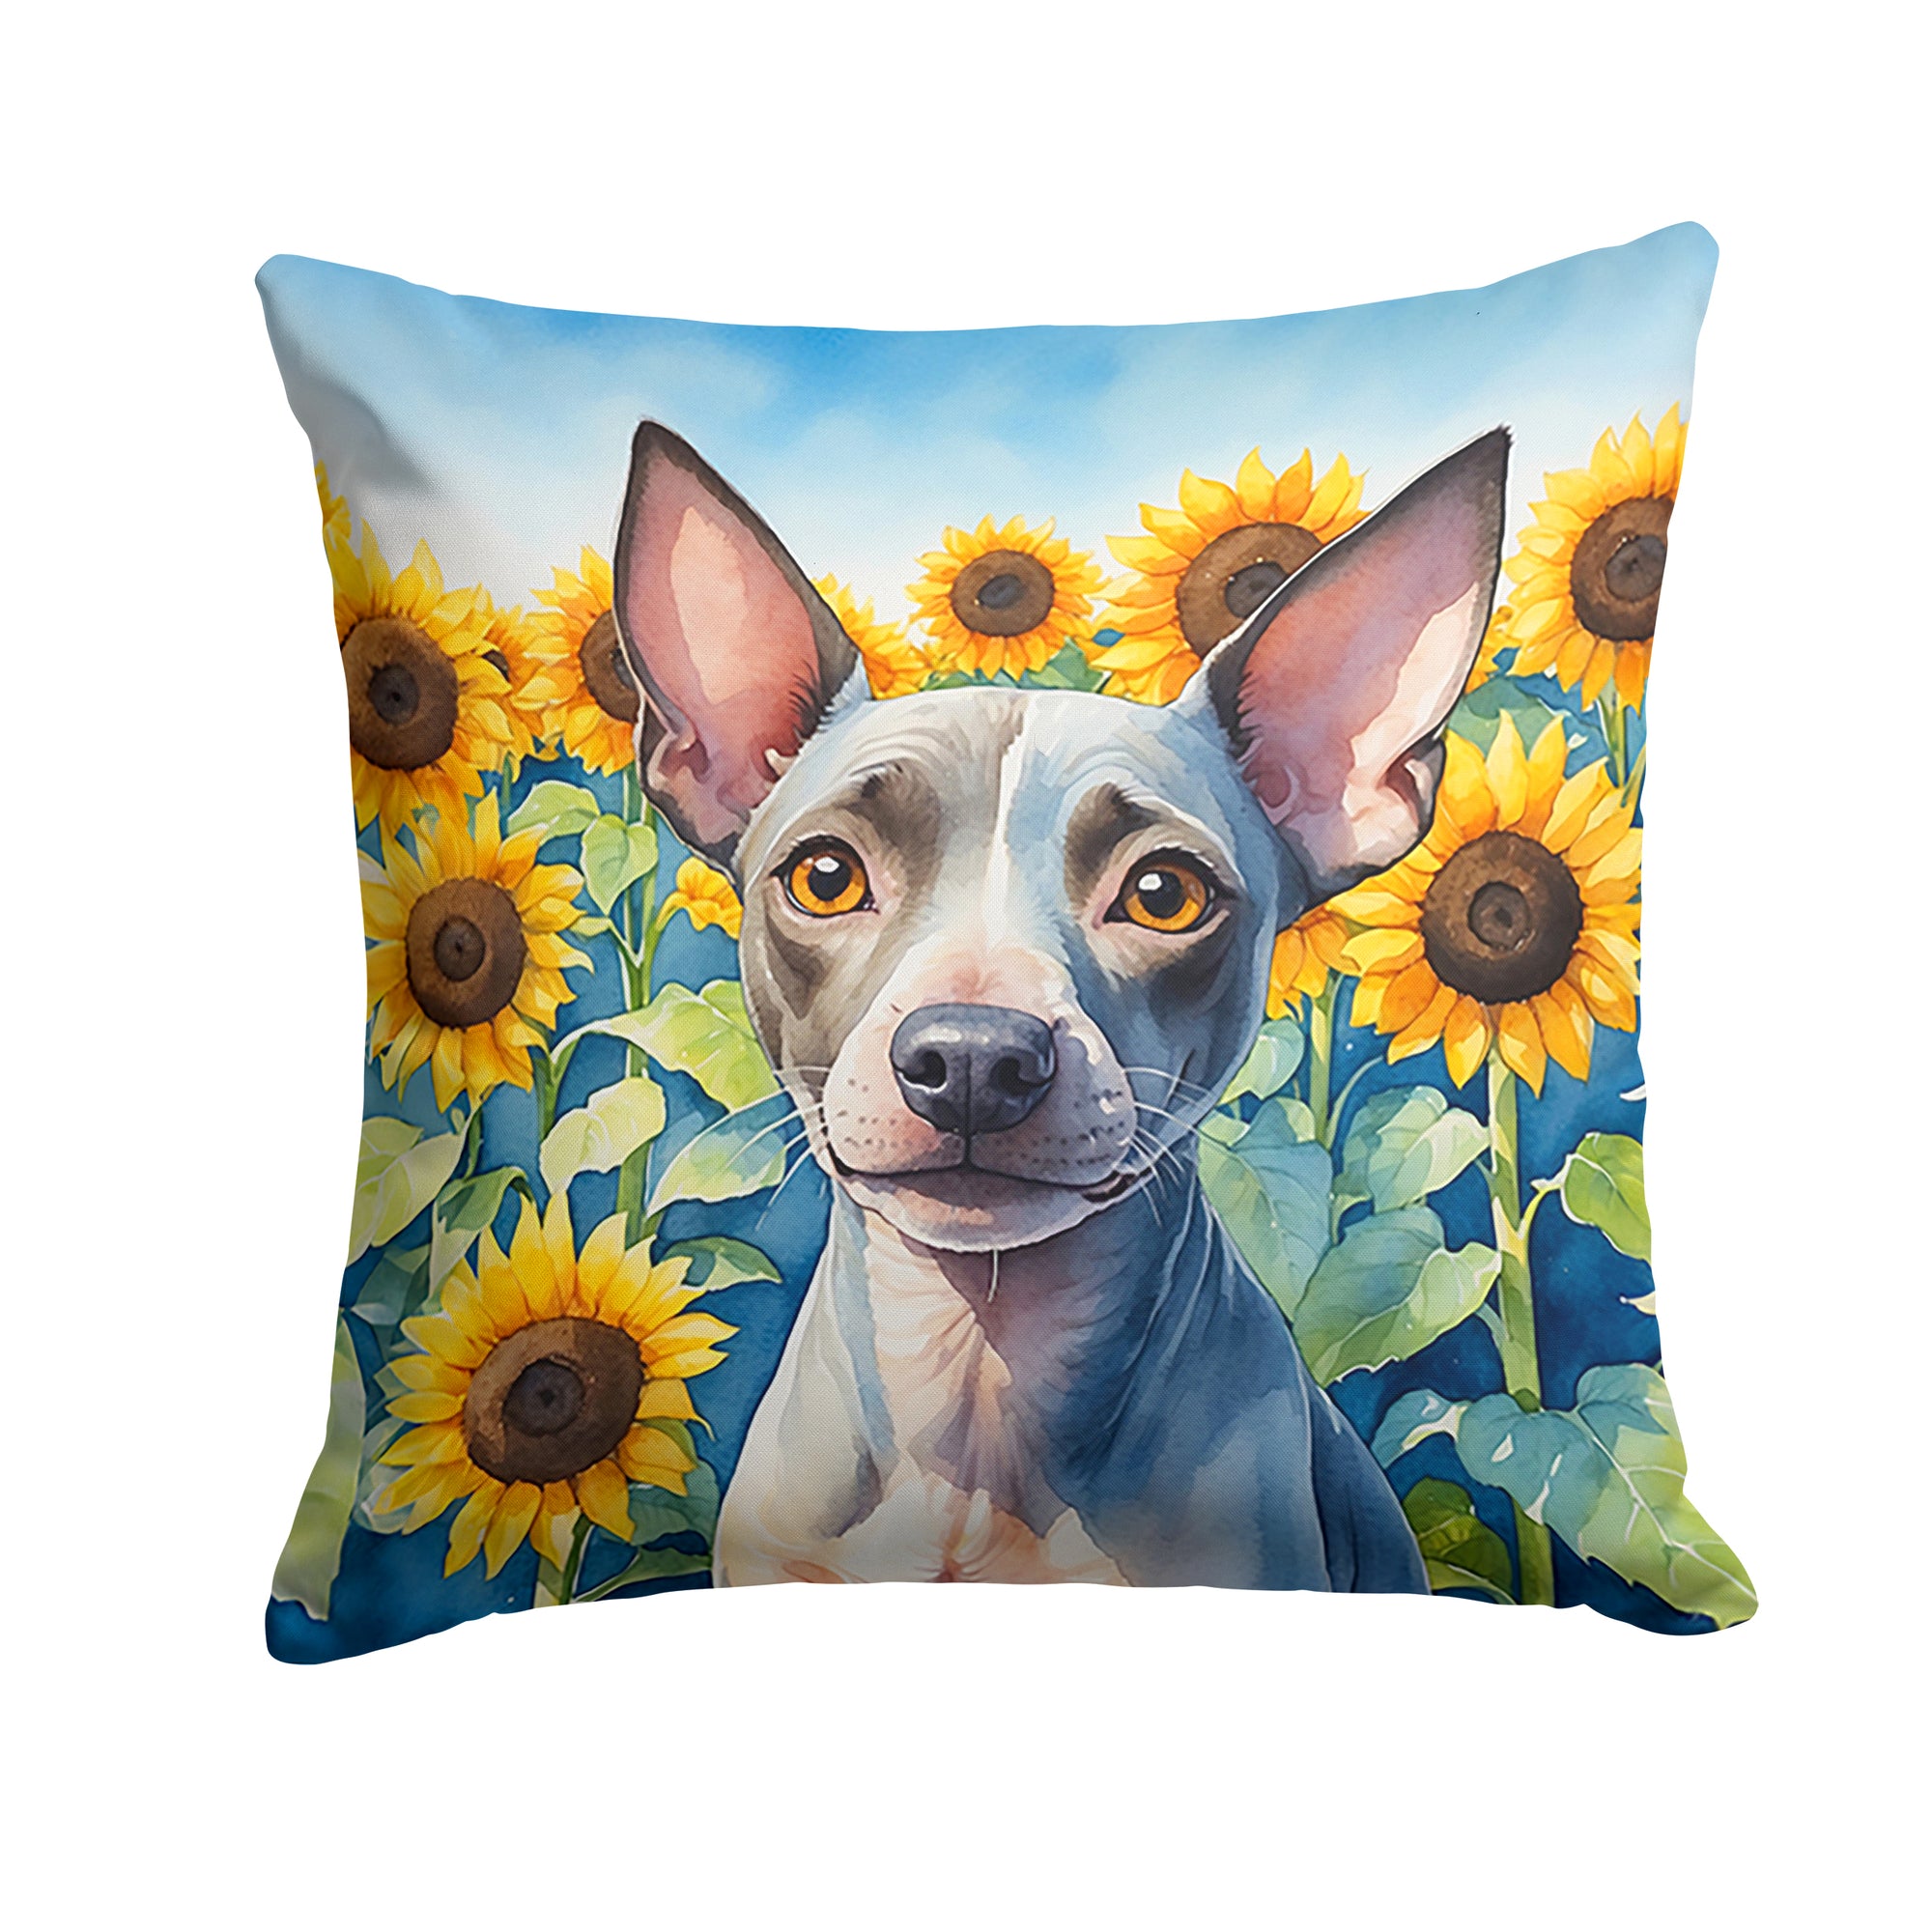 Buy this American Hairless Terrier in Sunflowers Throw Pillow